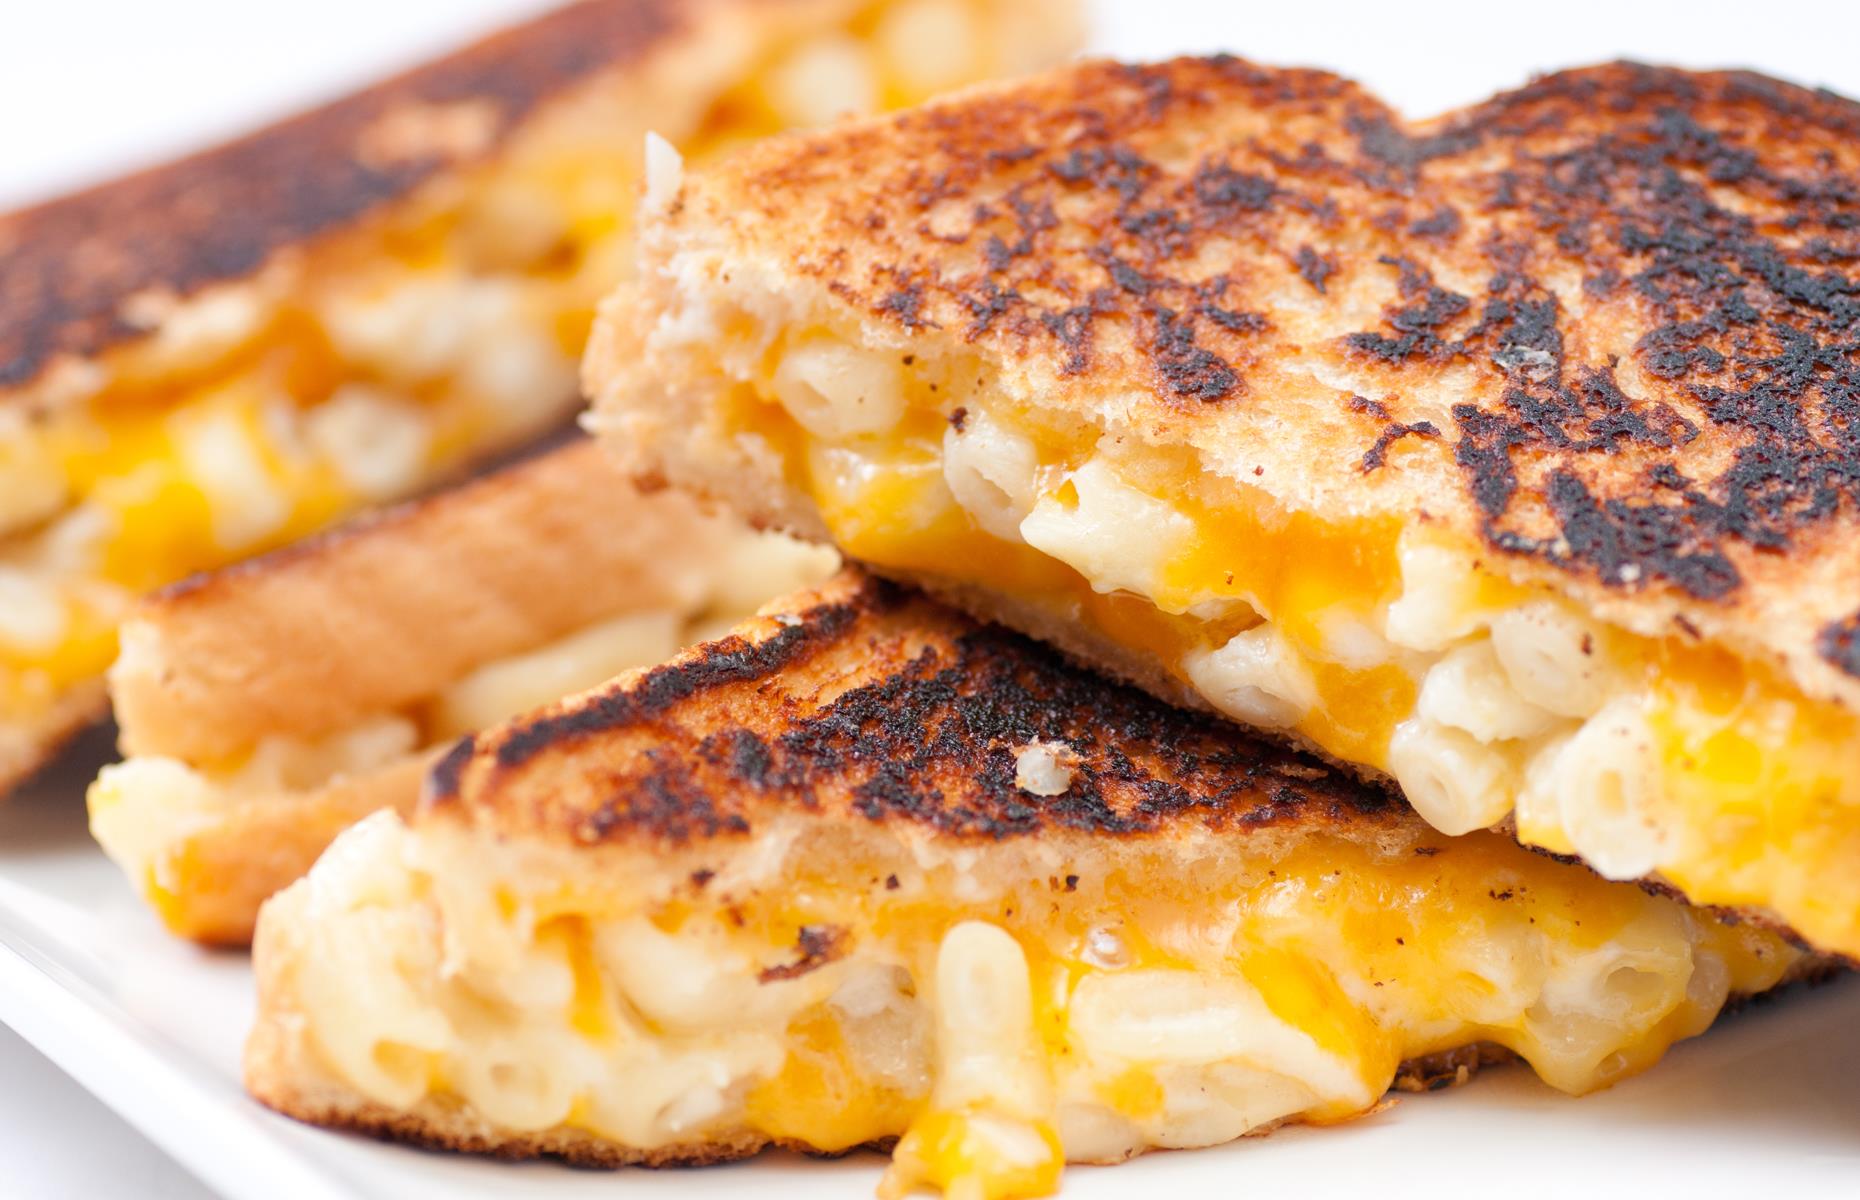 Double carb and put the mac 'n' cheese between two slices of bread. Either pan-fry or use a sandwich maker for a treat within a treat.